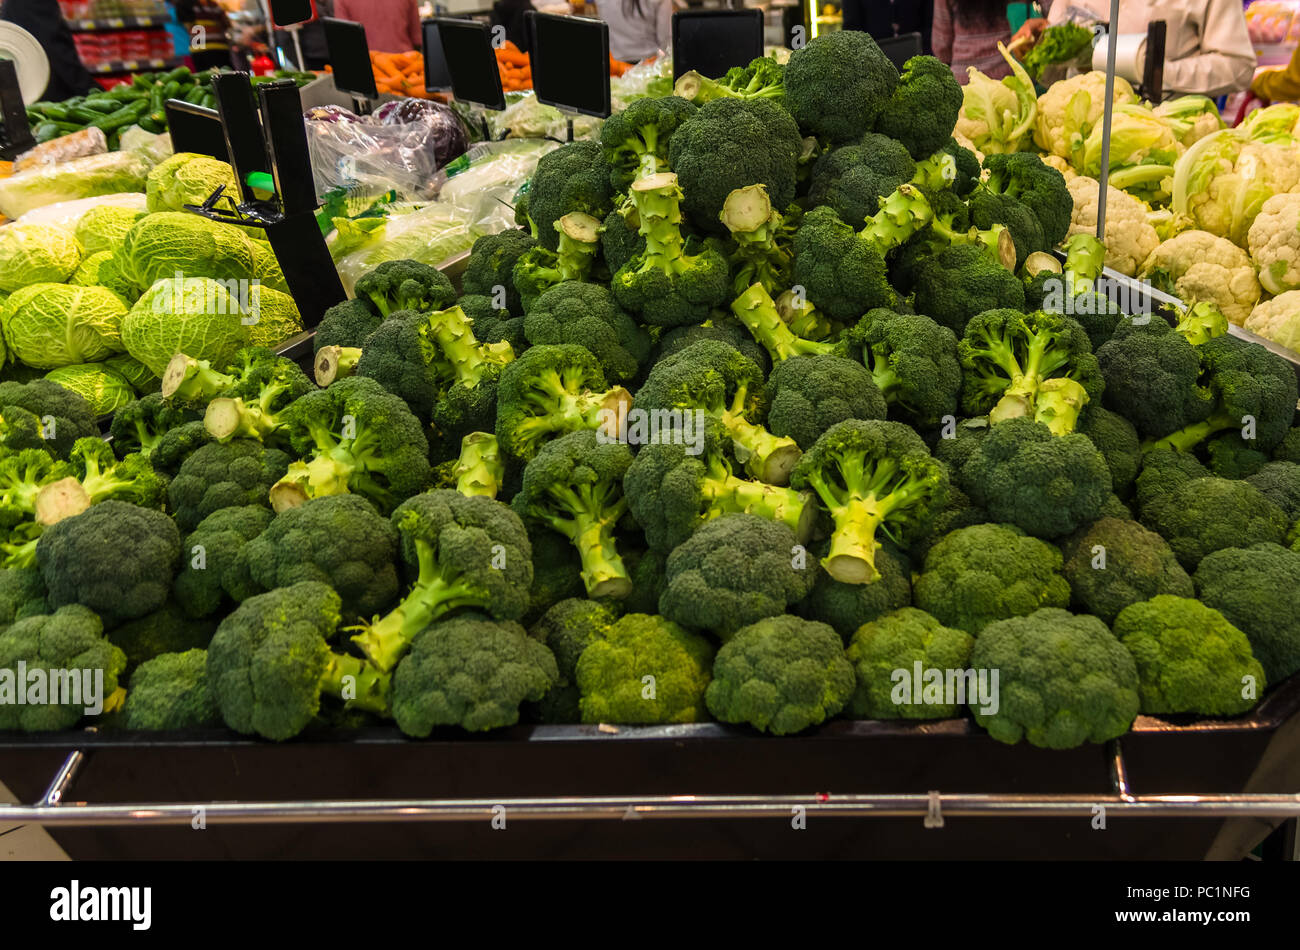 Bunch of broccoli's and other vegetables sold in a super market Stock Photo